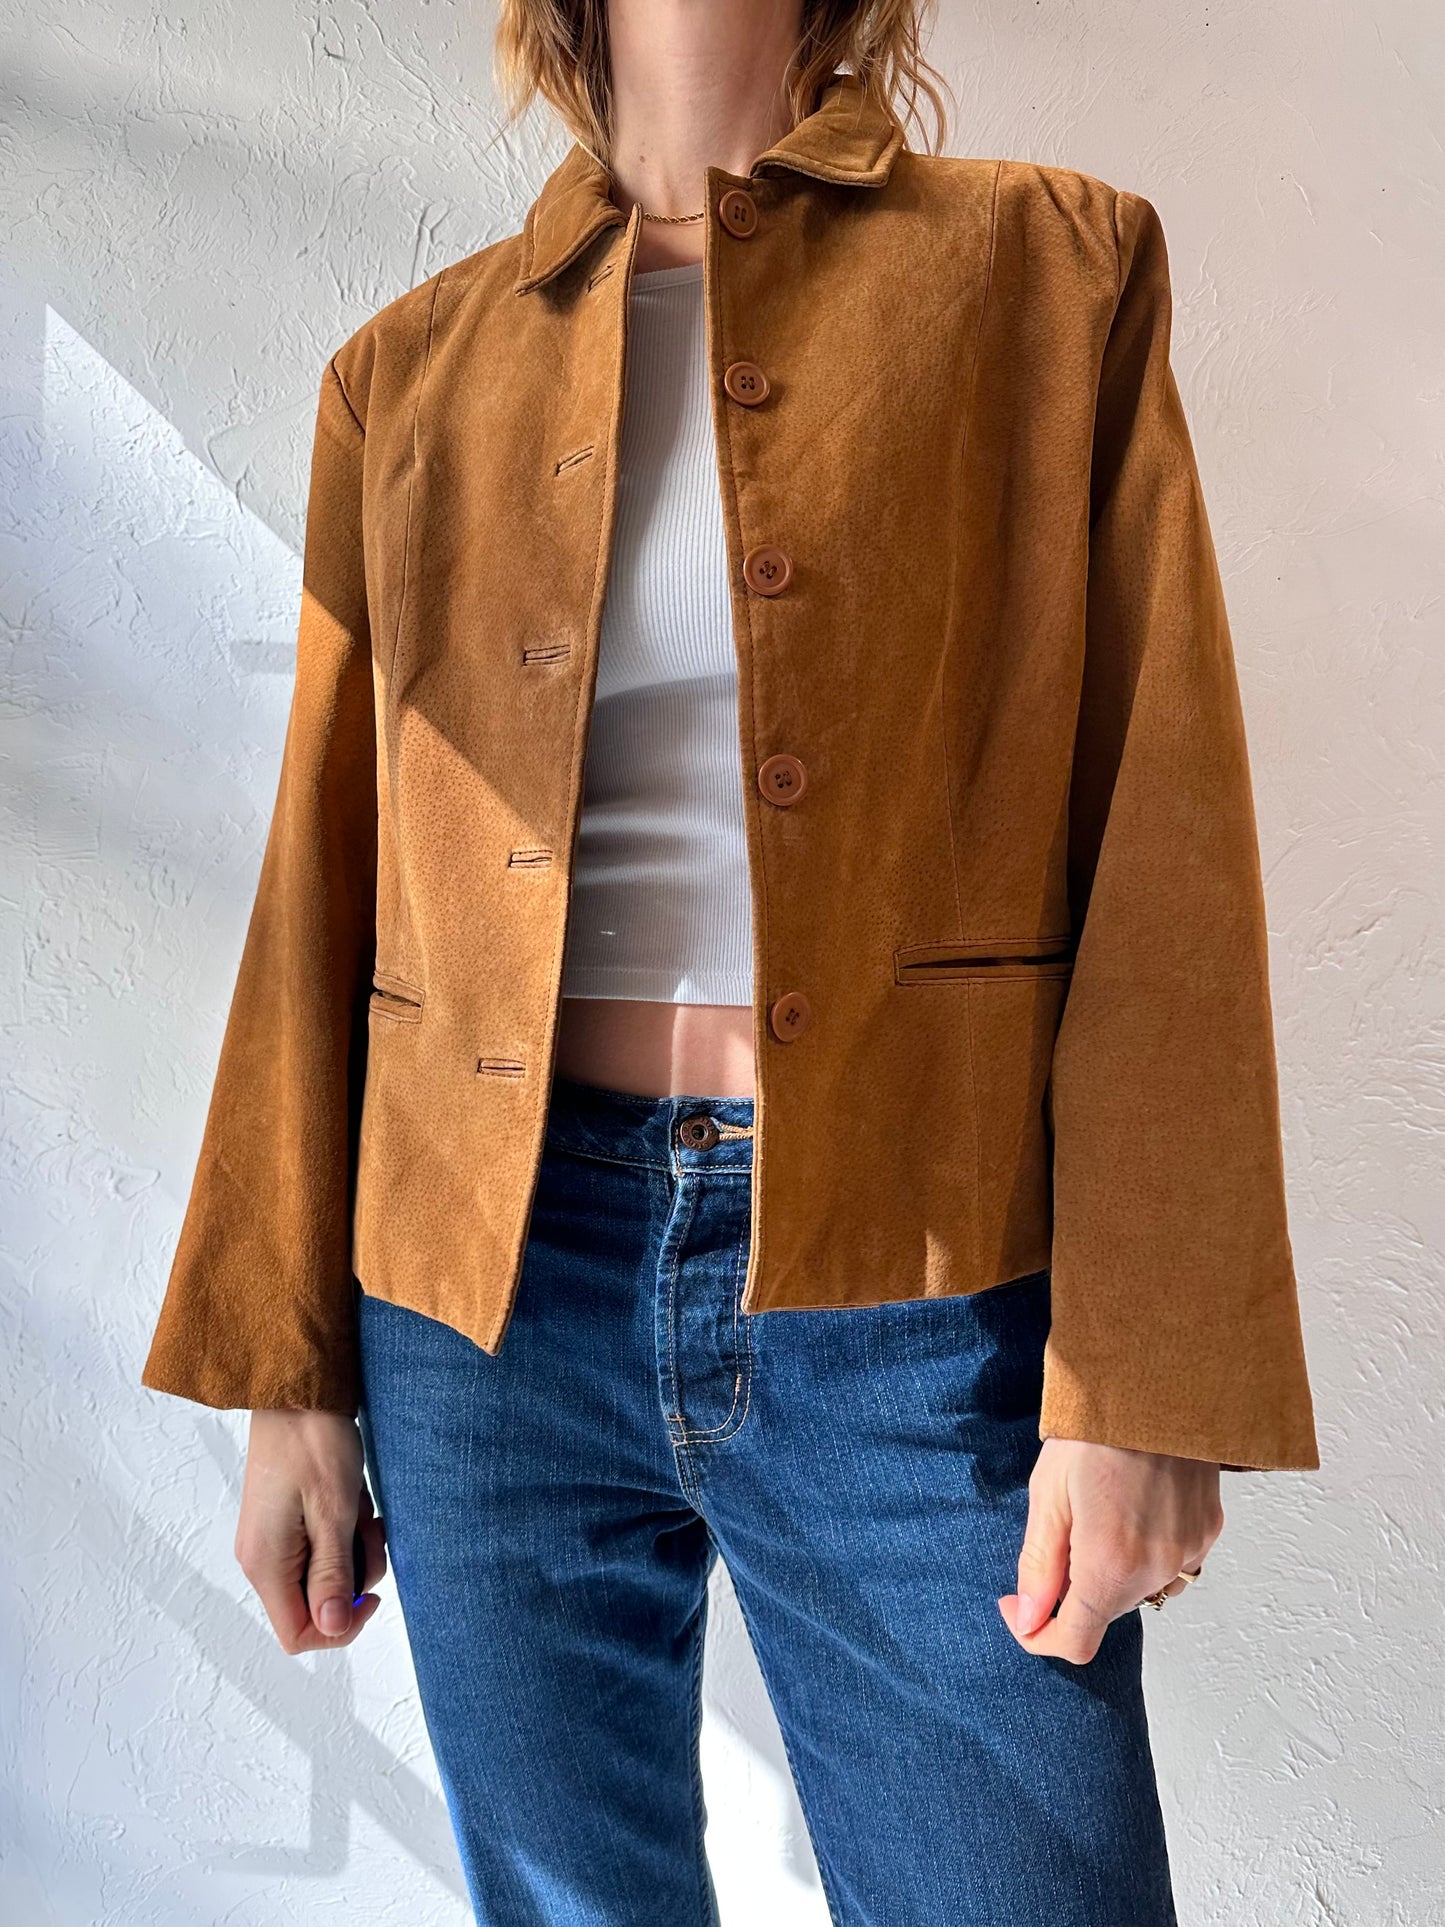 Y2k 'Kathy Ireland' Brown Suede Leather Jacket / Small